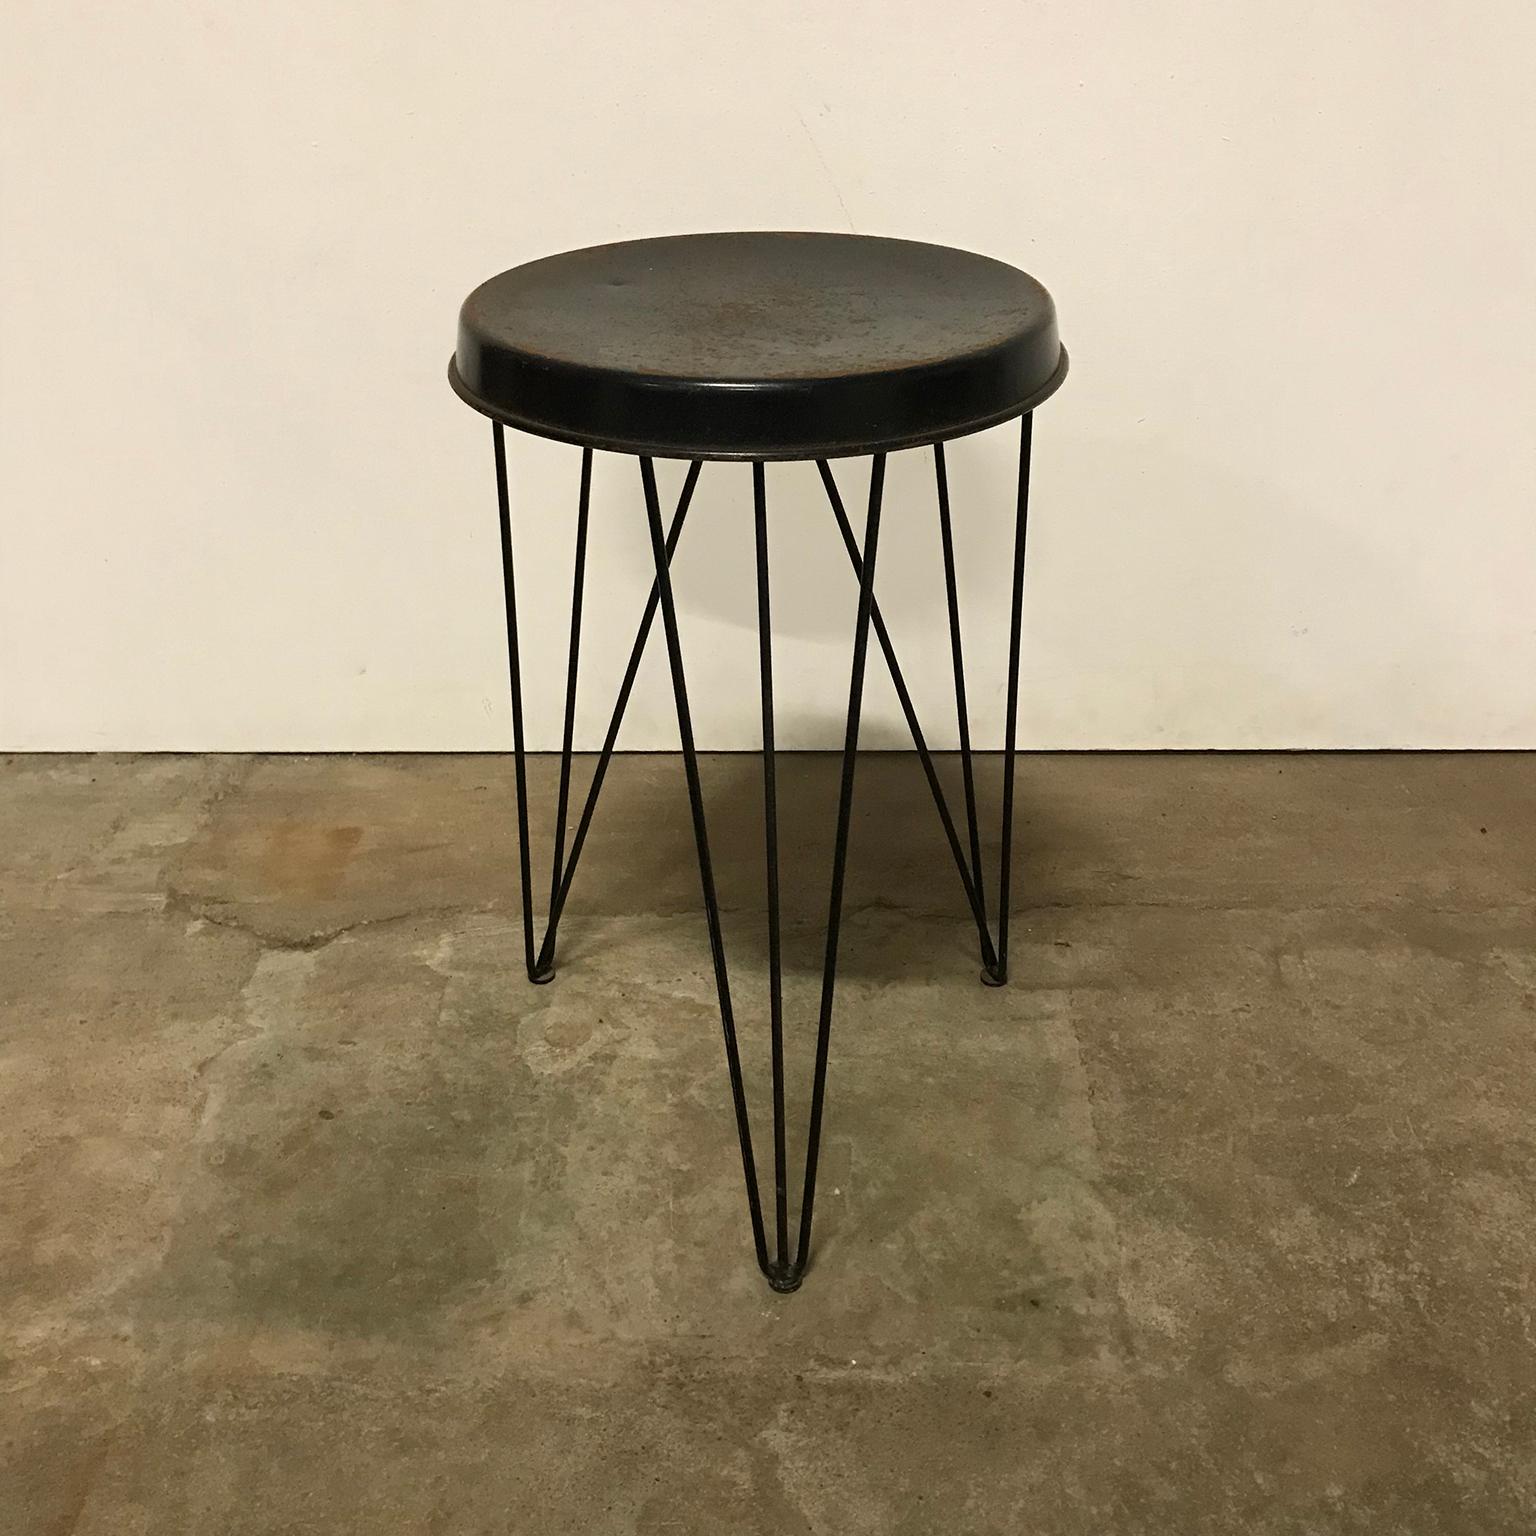 Pilastro, Tjerk Reijenga vintage sixties stool. Sculptural metal wire base and plate metal seat. Designed in 1966 by Tjerk Reijenga for Pilastro, Zwanenburg – Holland. Tjerk Reijenga was the leading designer of the Pilastro collection from the 1950s